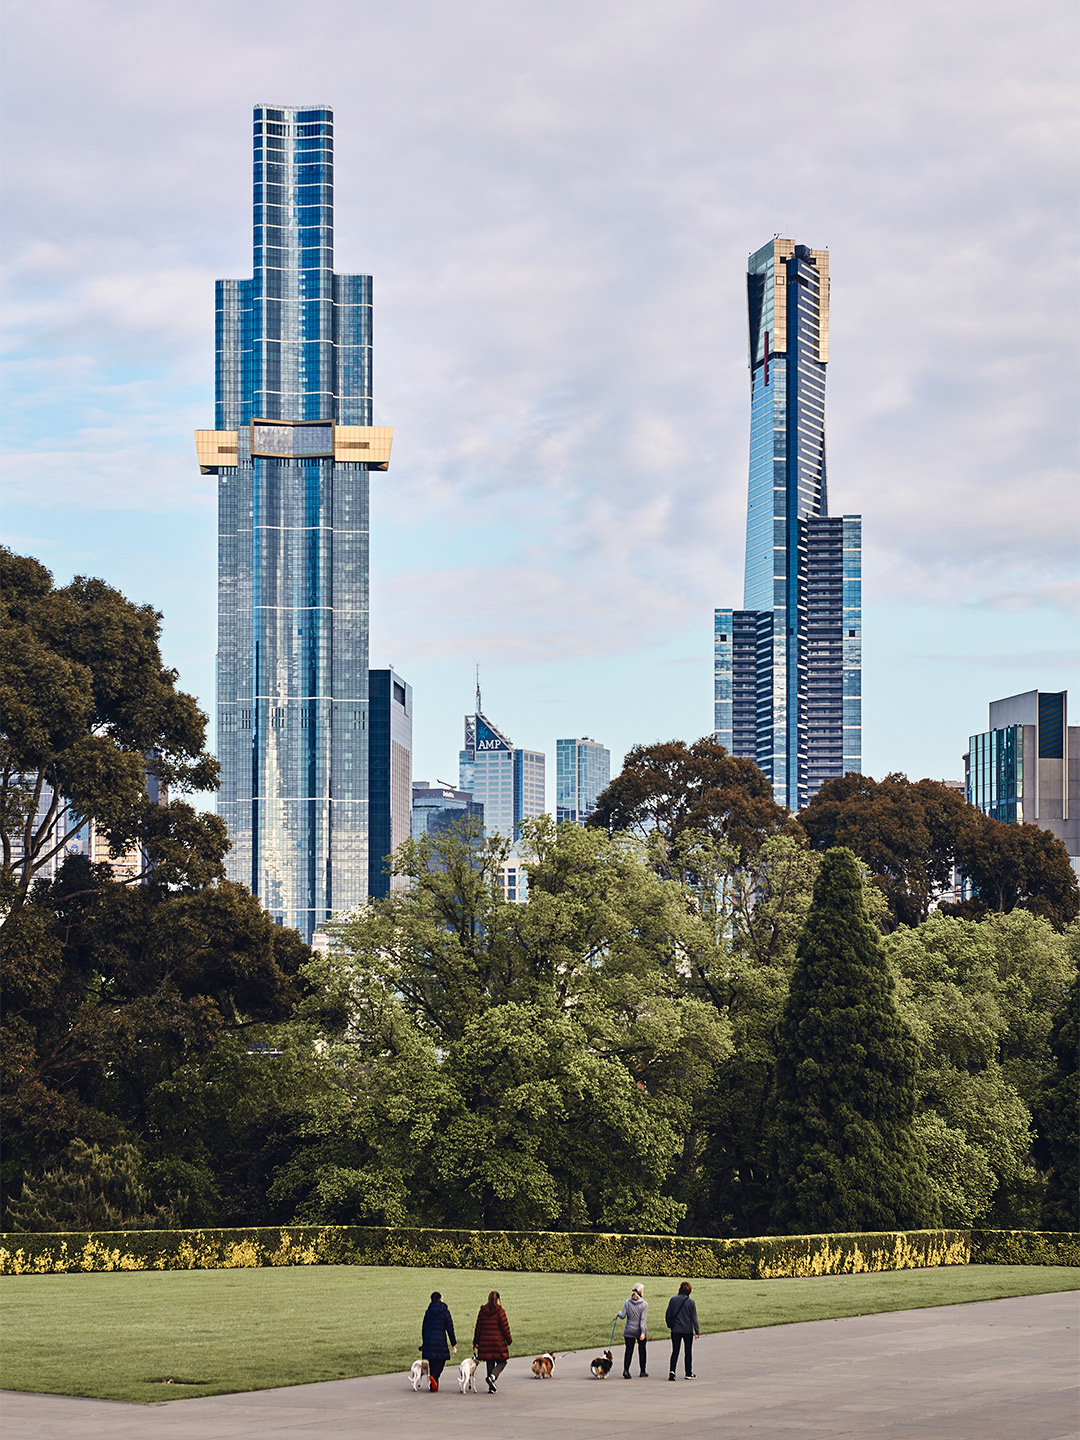 Australia 108, the southern hemisphere's tallest residential tower, located in Melbourne, Australia. 